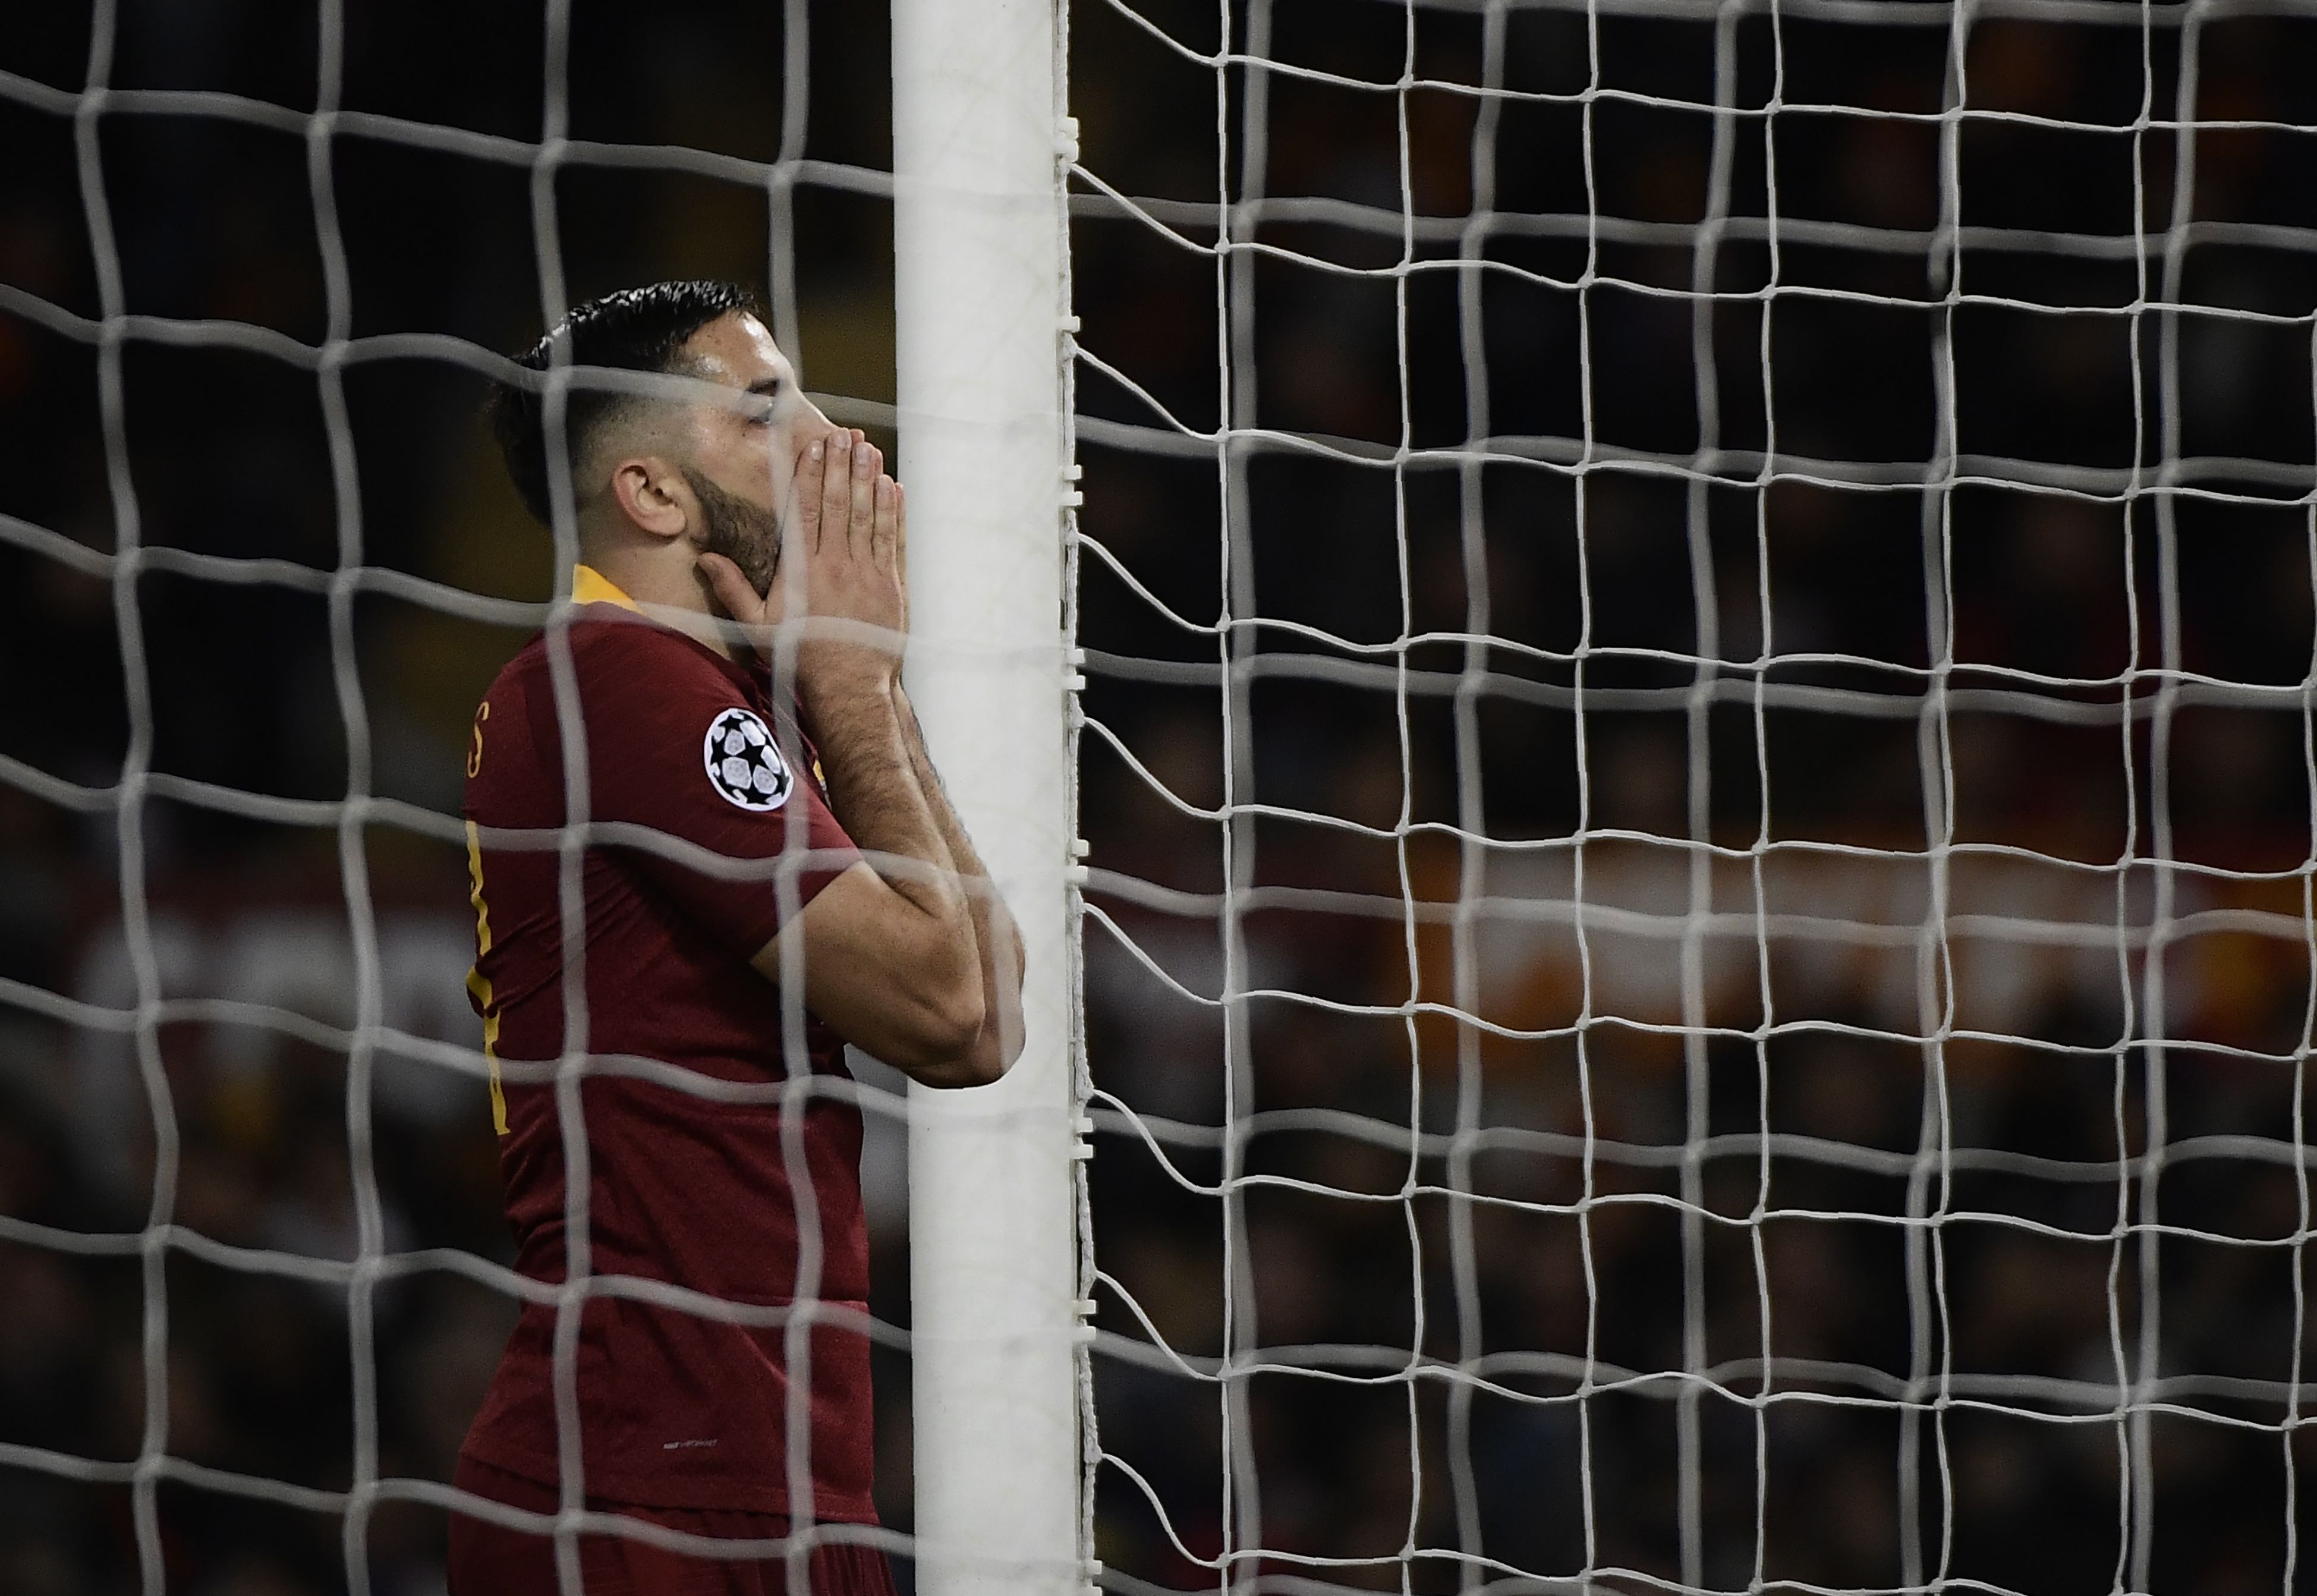 AS Roma Greek defender Konstantinos Manolas reacts after missing a goal during the UEFA Champions League group G football match AS Rome vs Real Madrid on November 27, 2018 at the Olympic stadium in Rome. (Photo by Filippo MONTEFORTE / AFP)        (Photo credit should read FILIPPO MONTEFORTE/AFP/Getty Images)